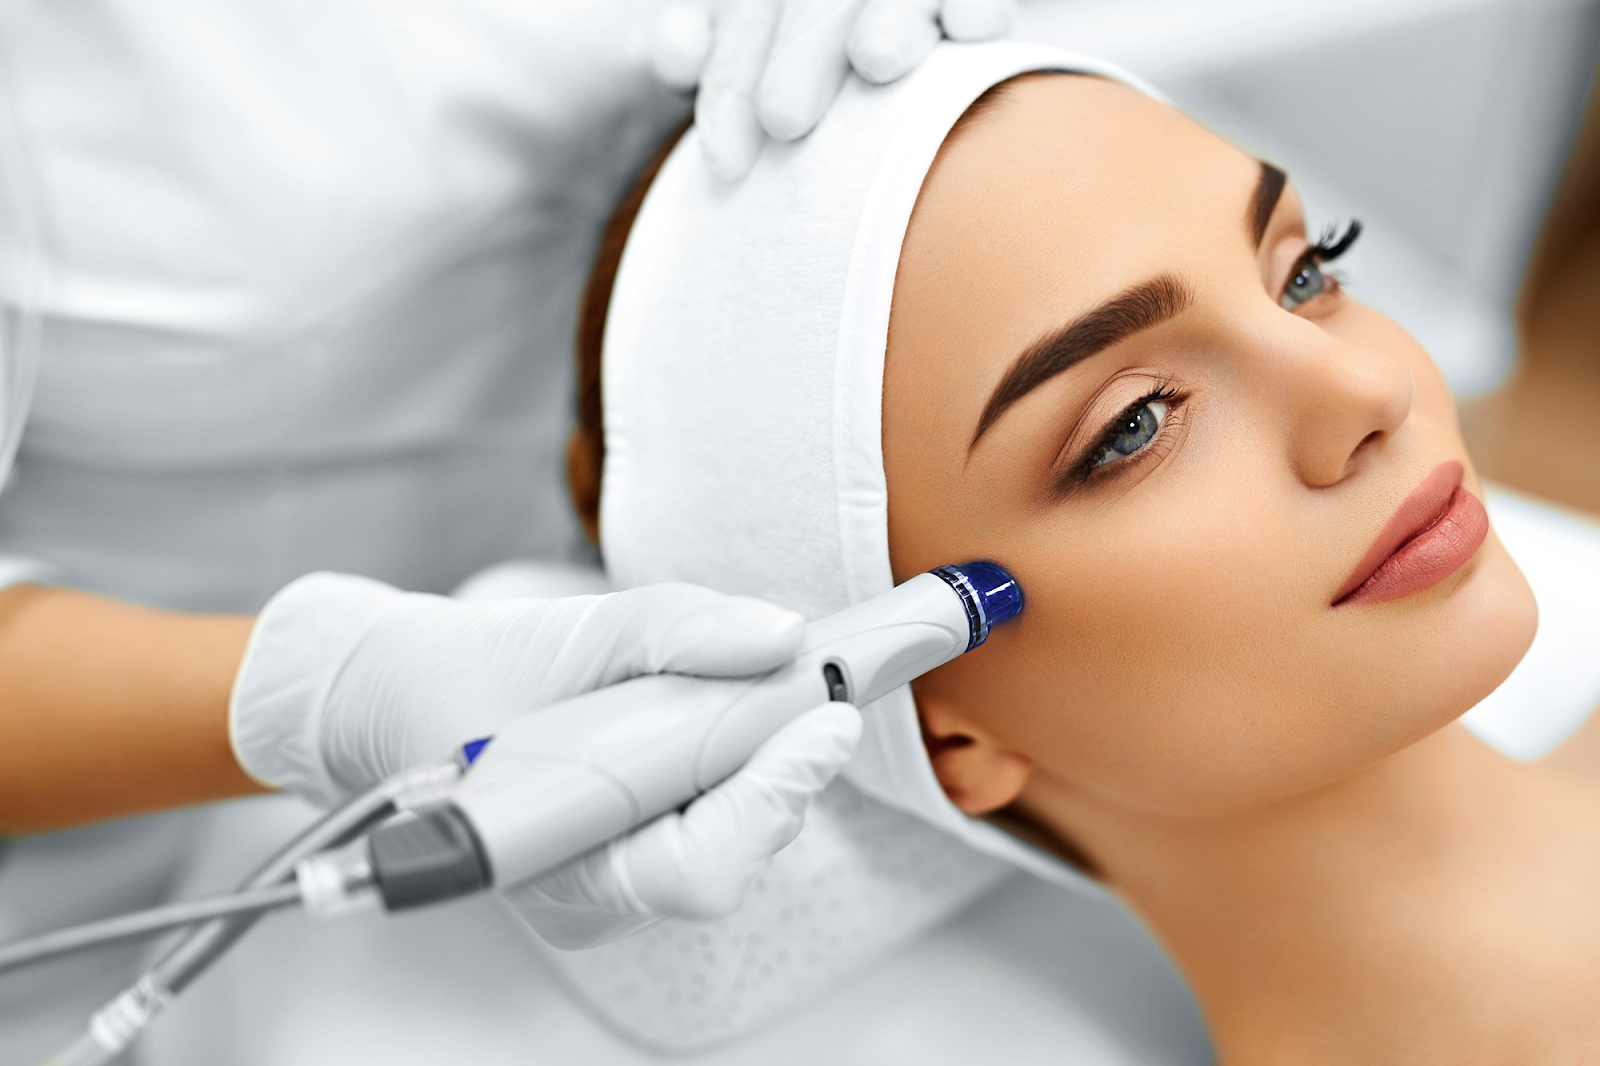 5 Best Non-Surgical Facelift Treatments to Try in 2022